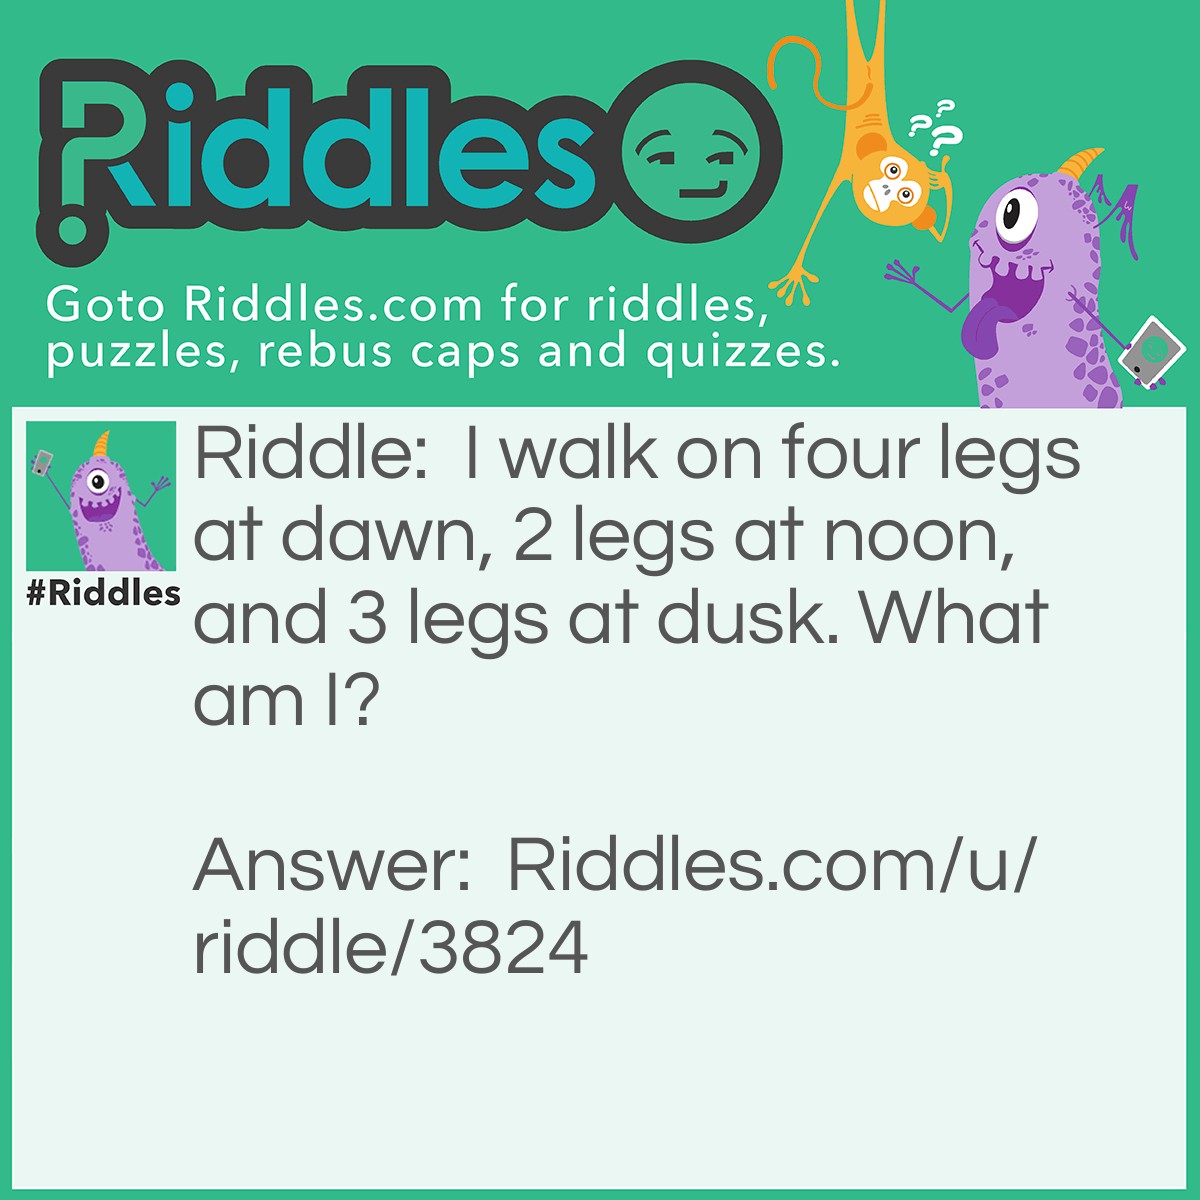 Riddle: I walk on four legs at dawn, 2 legs at noon, and 3 legs at dusk. What am I? Answer: Man. They crawl on four limbs when they're babies, two legs at the middle of their life, and when they're old, they use a cane.